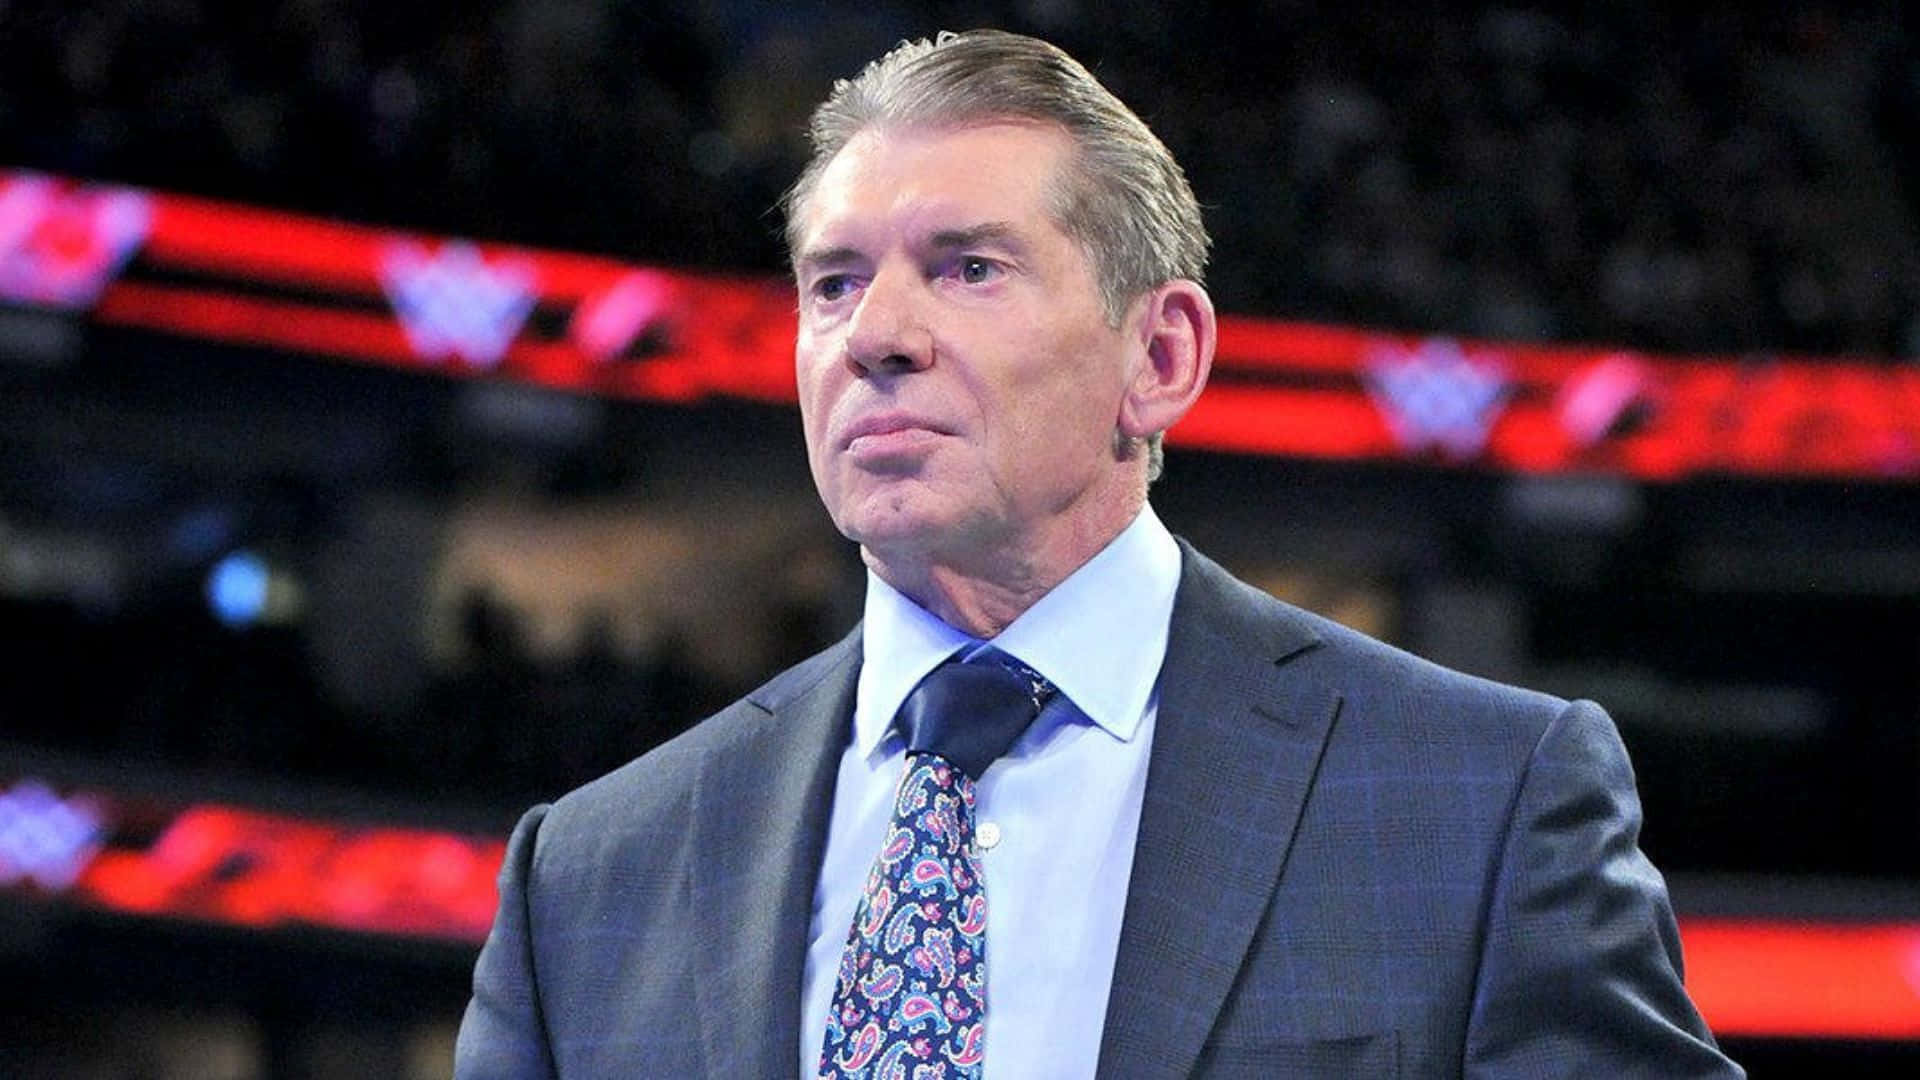 Wwe Commentator Vince Mcmahon Inside The Ring